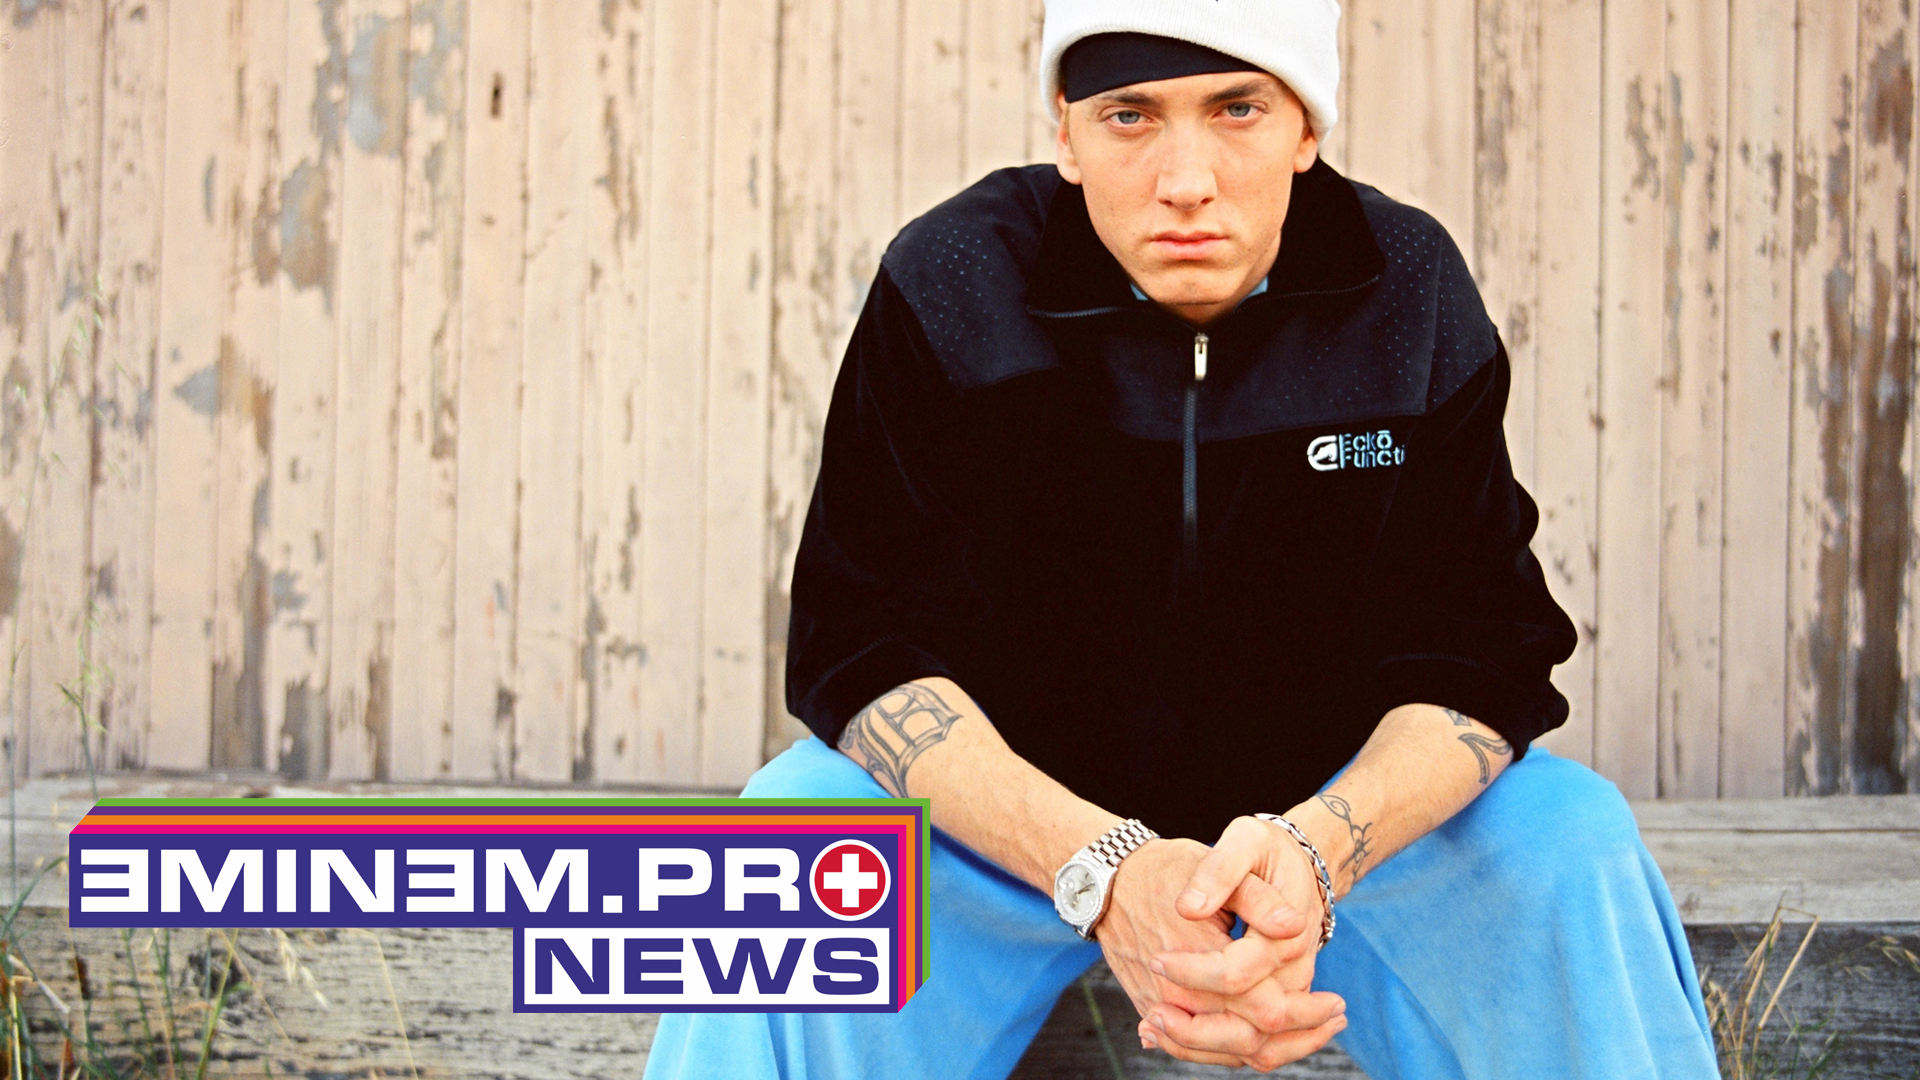 ePro News 57: Eminem crushes NRA in Nowhere Fast, new music soon and latest Shady moments